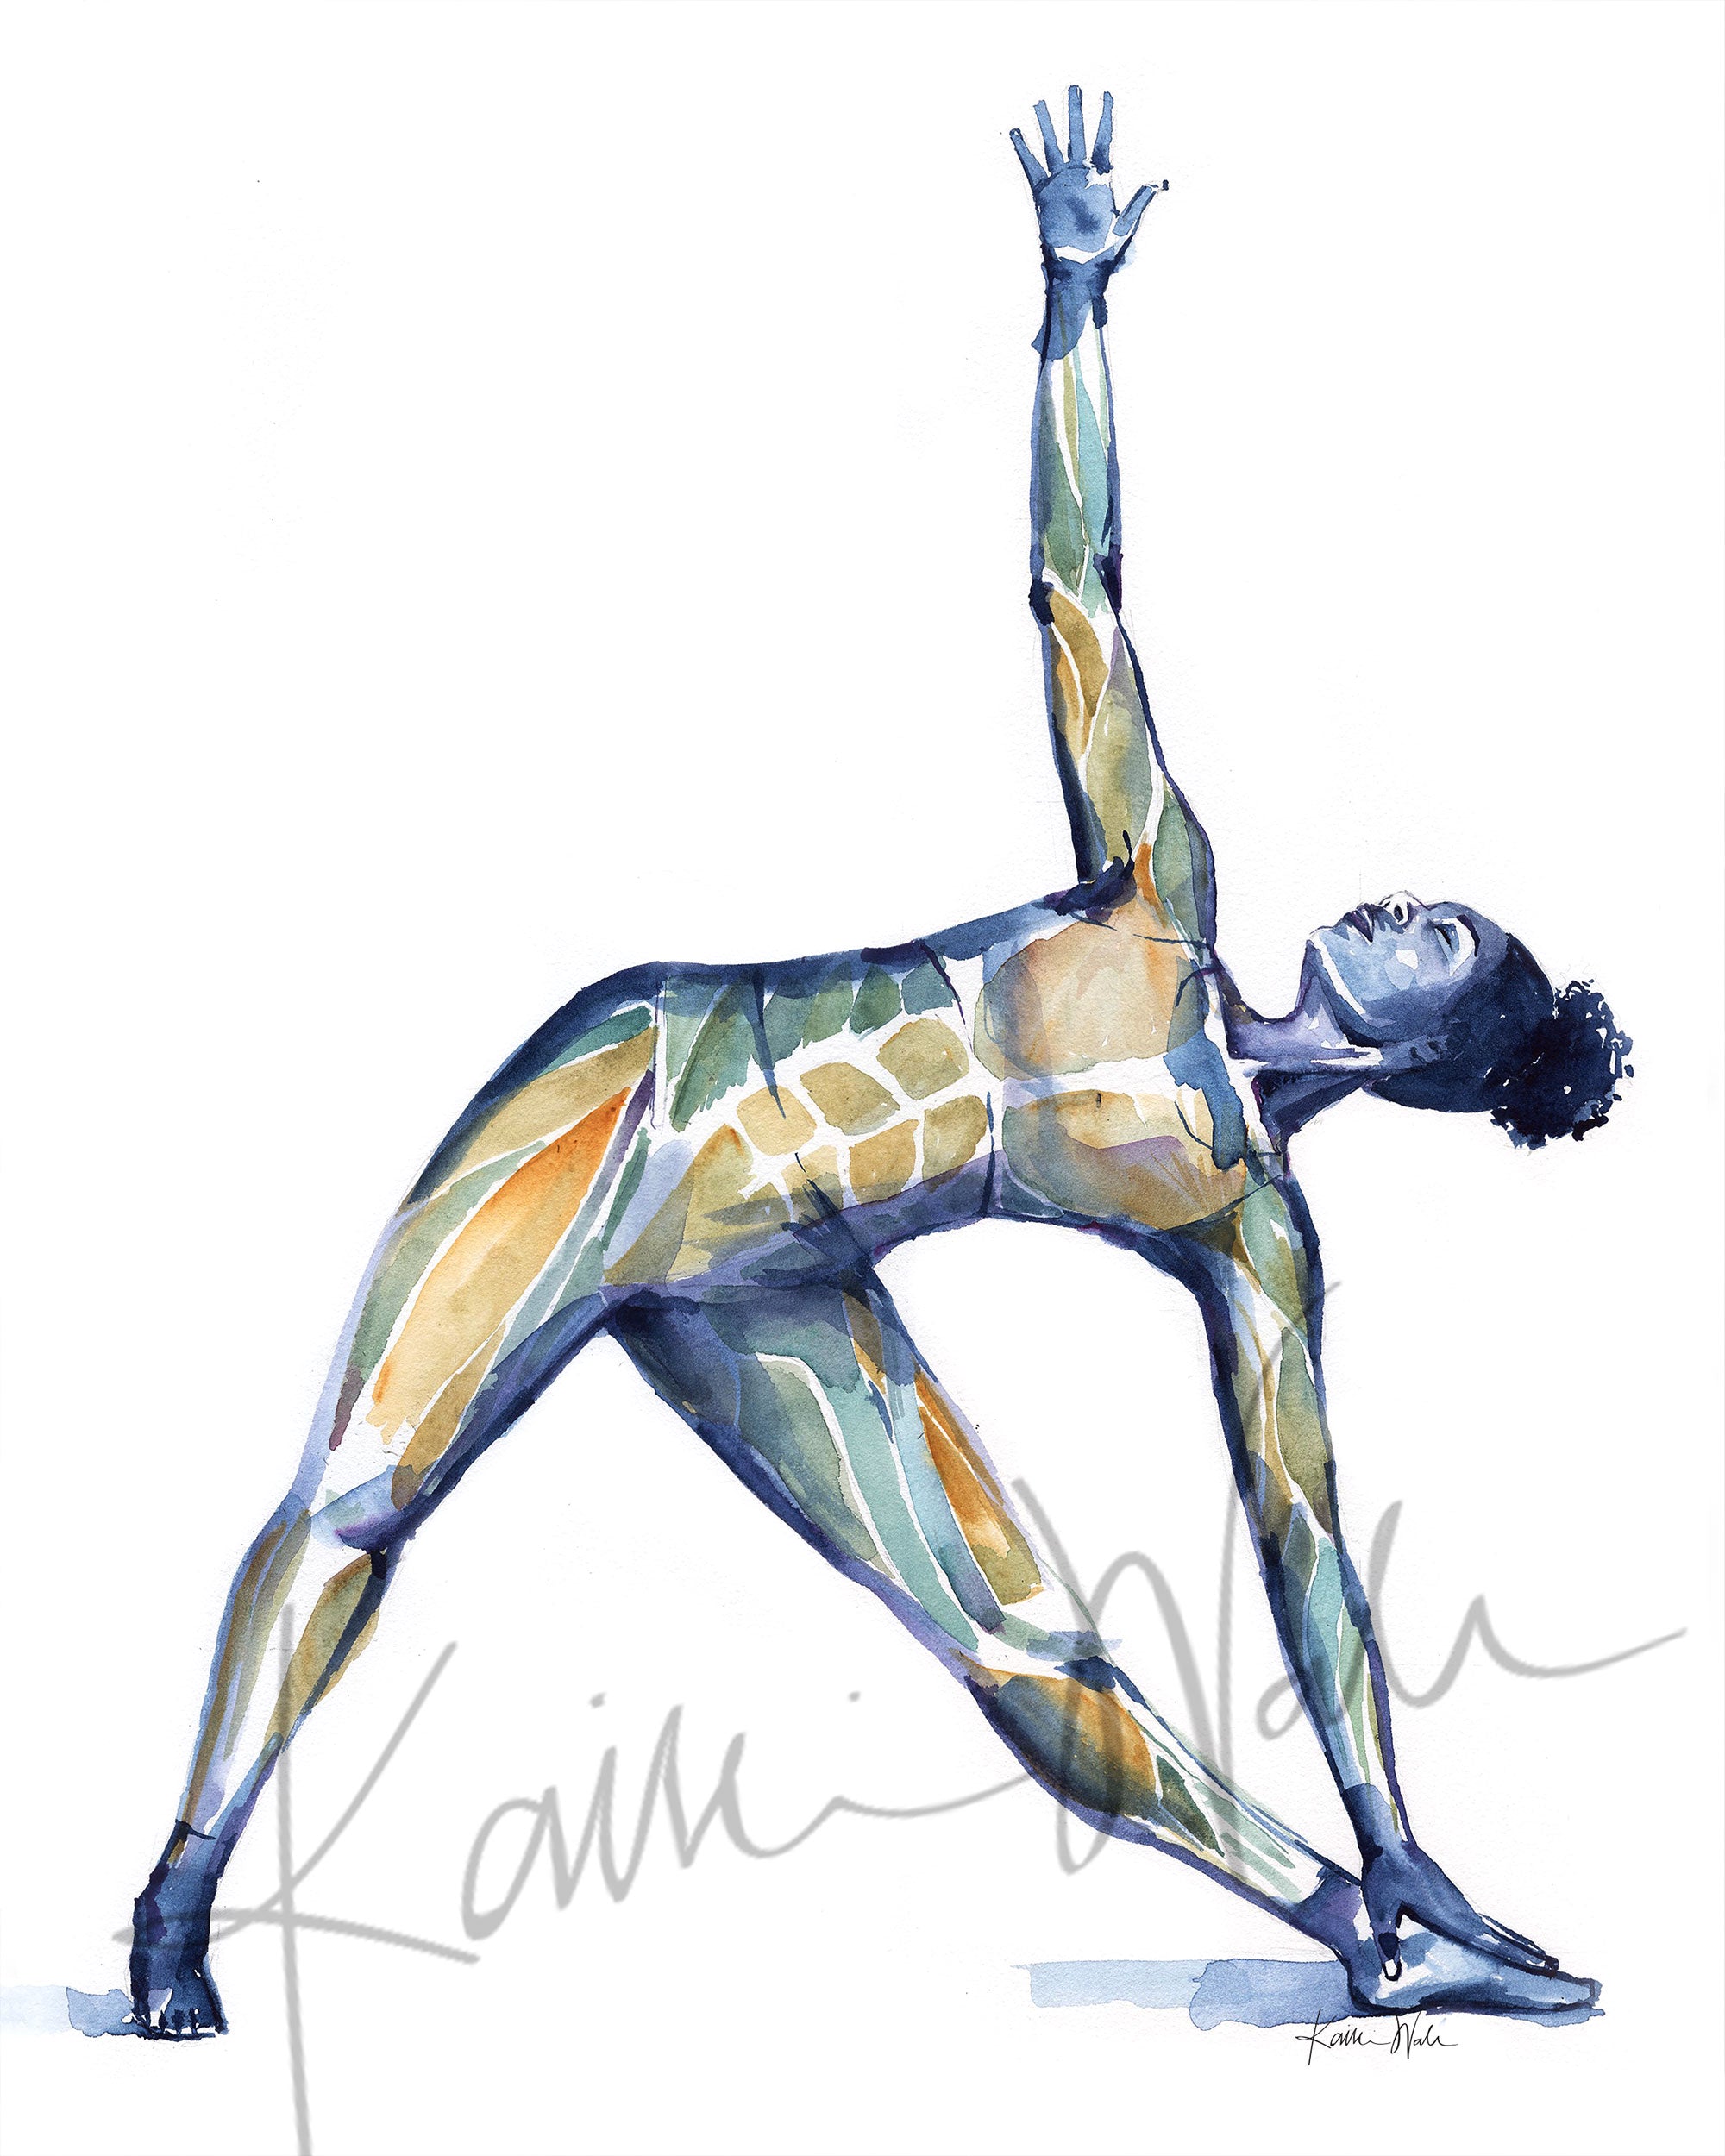 Unframed watercolor painting of a woman doing a triangle yoga pose with her muscular system showing beneath her skin.